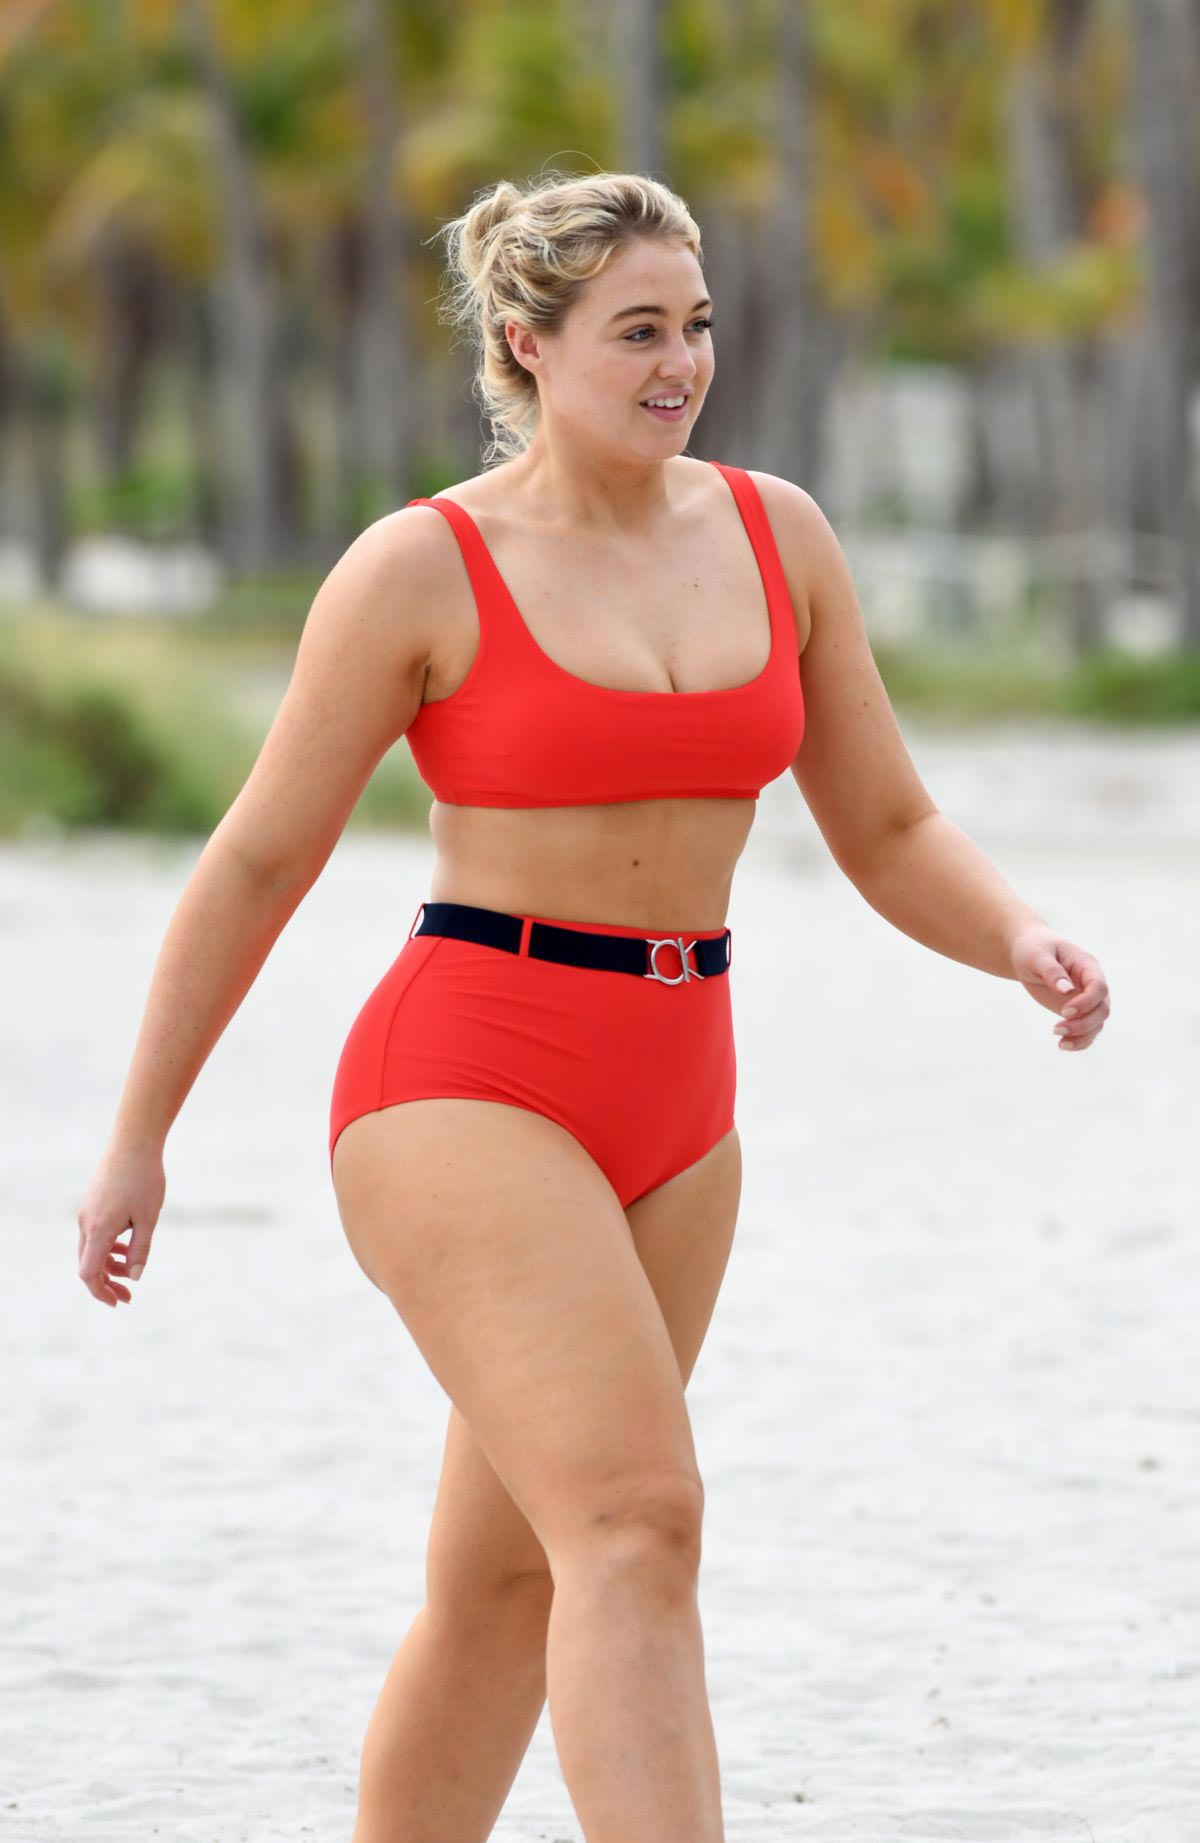 Iskra Lawrence in Red Bikini for Aerie Photoshoot in Key Biscayne 2018/11/27